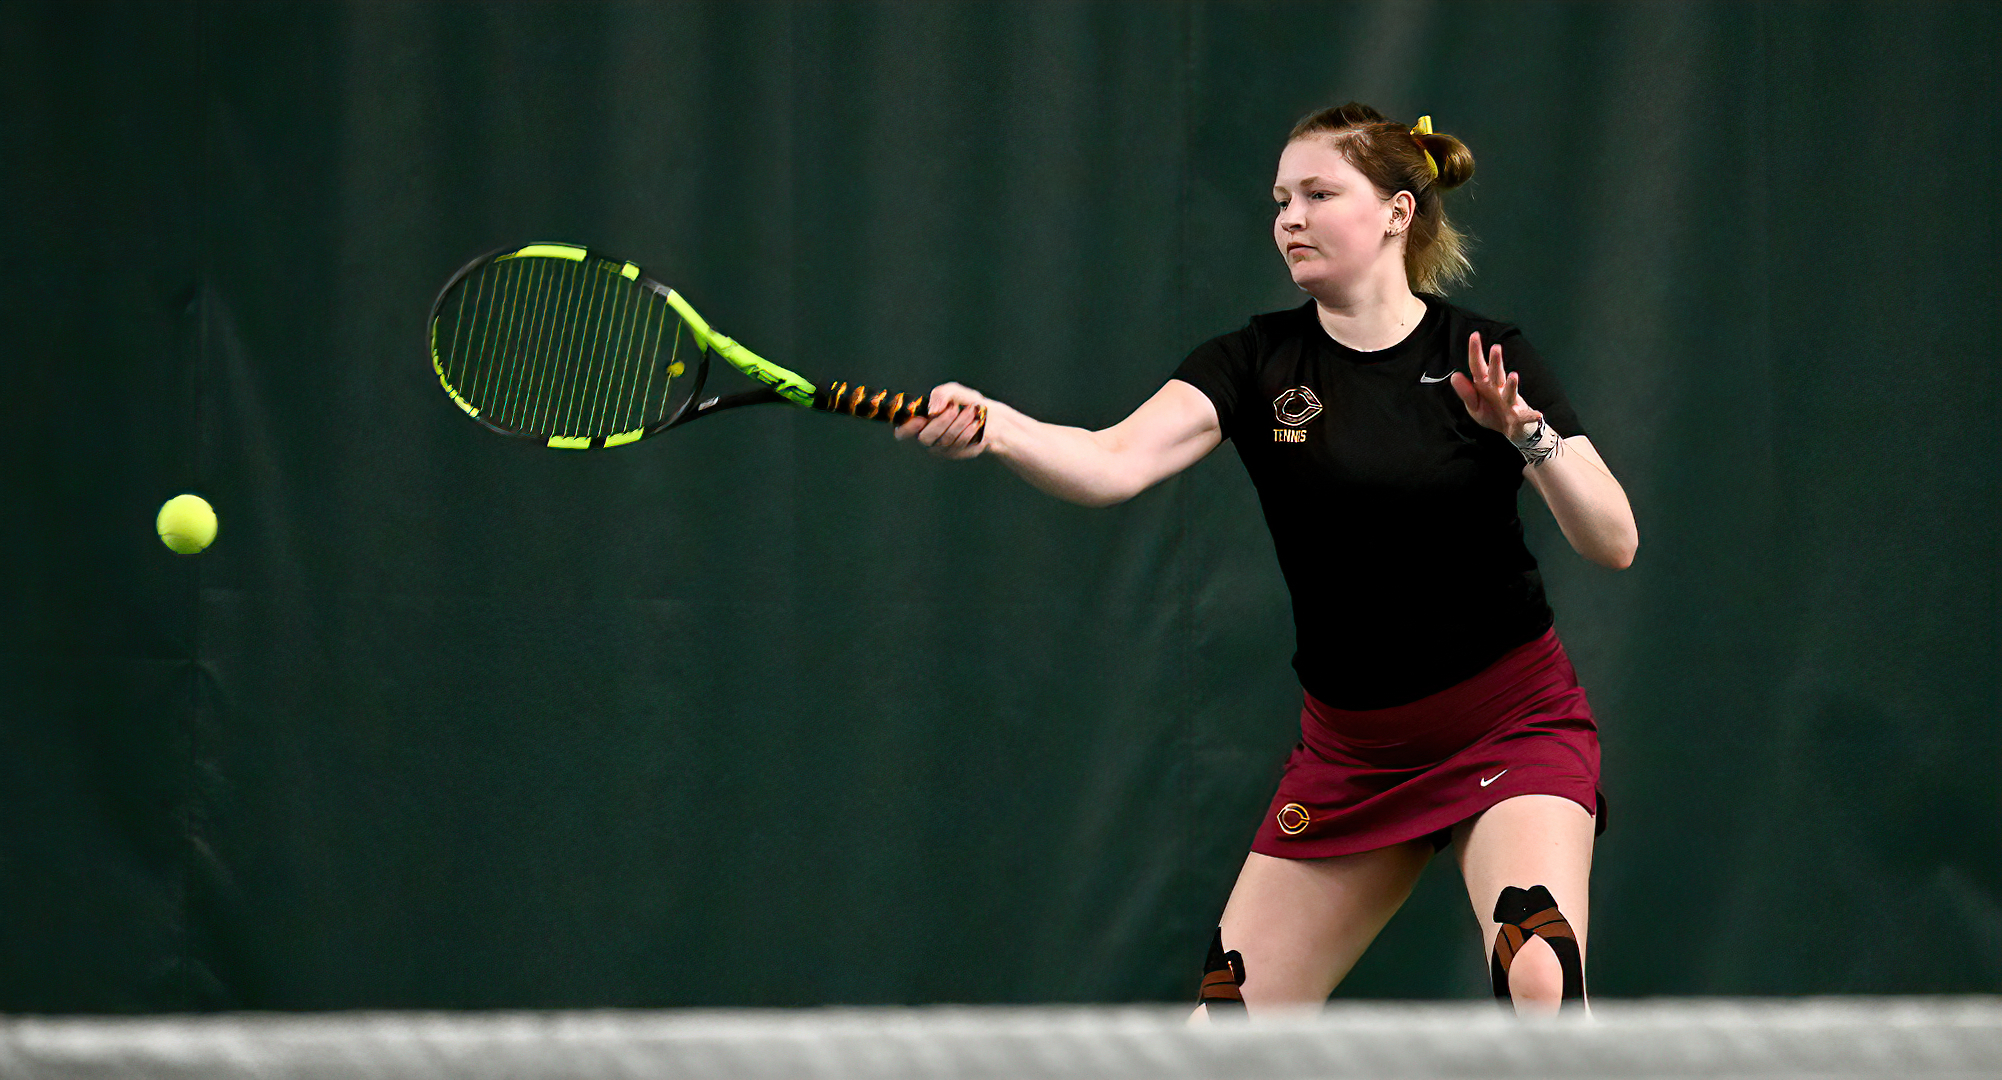 Junior Mary Skorich posted a 6-3, 6-3 win at No.3 singles in the Cobber's match with St. Catherine.